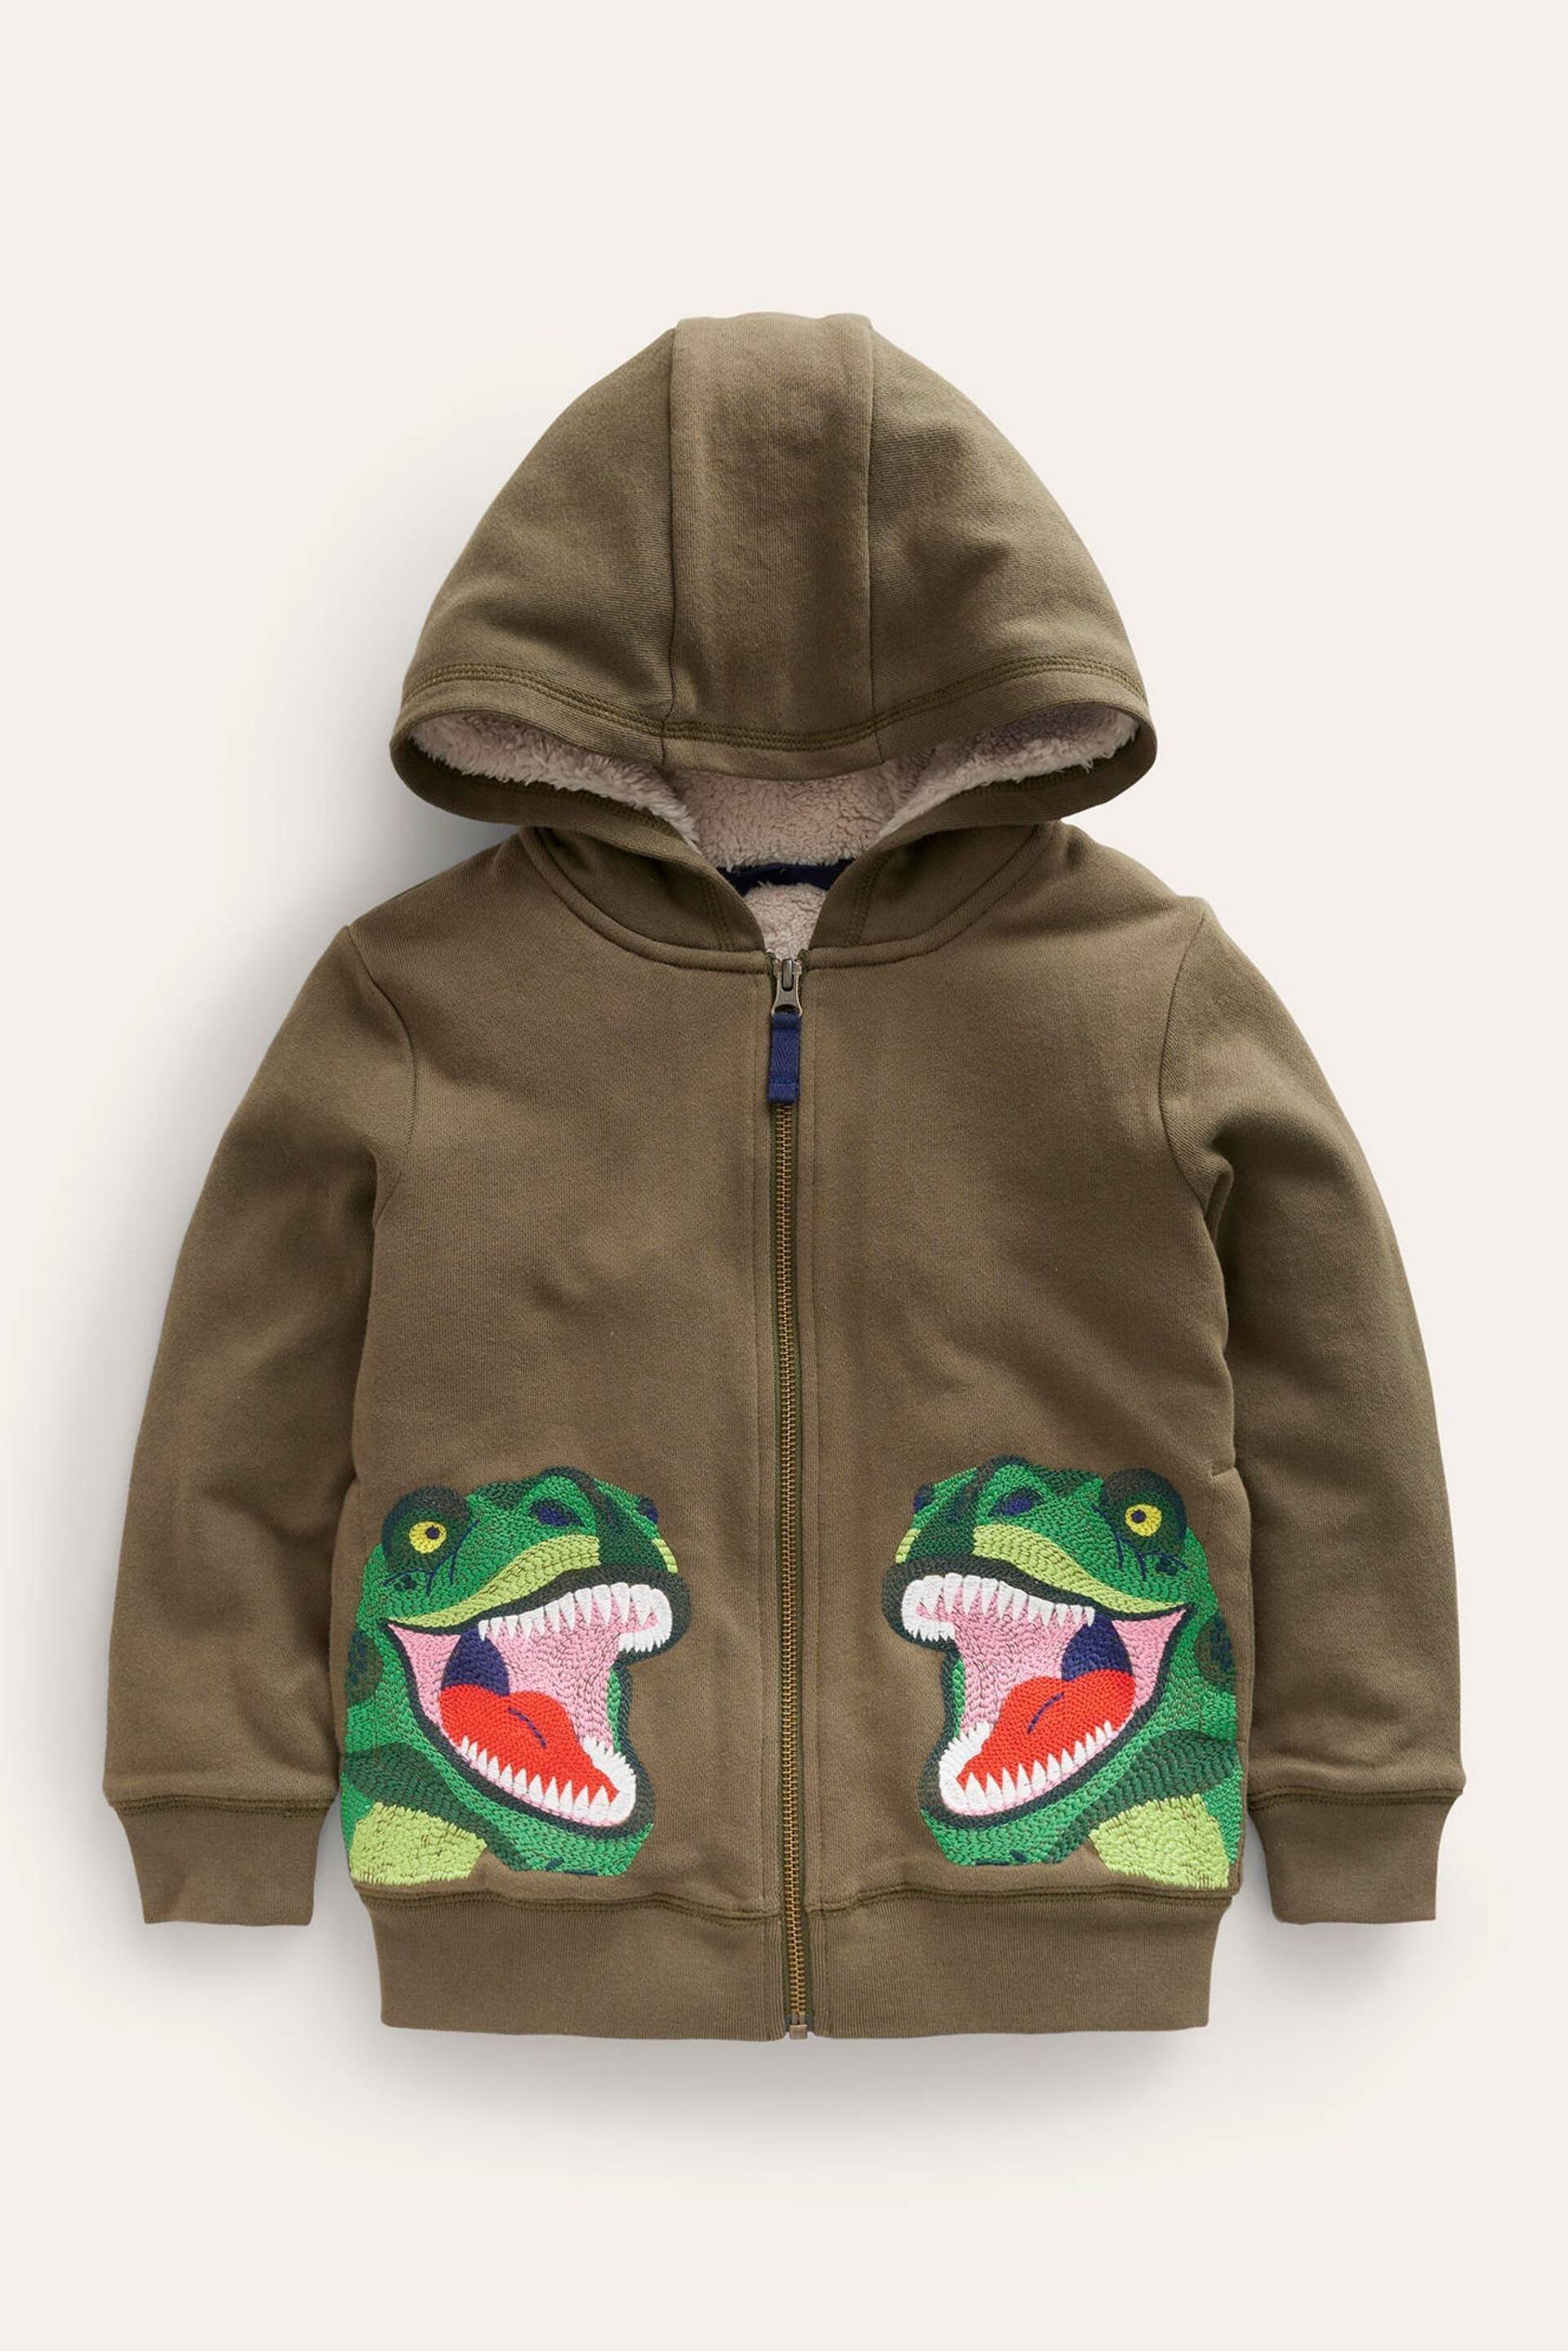 Boden Green Shaggy-lined Appliqué Hoodie - Image 1 of 3